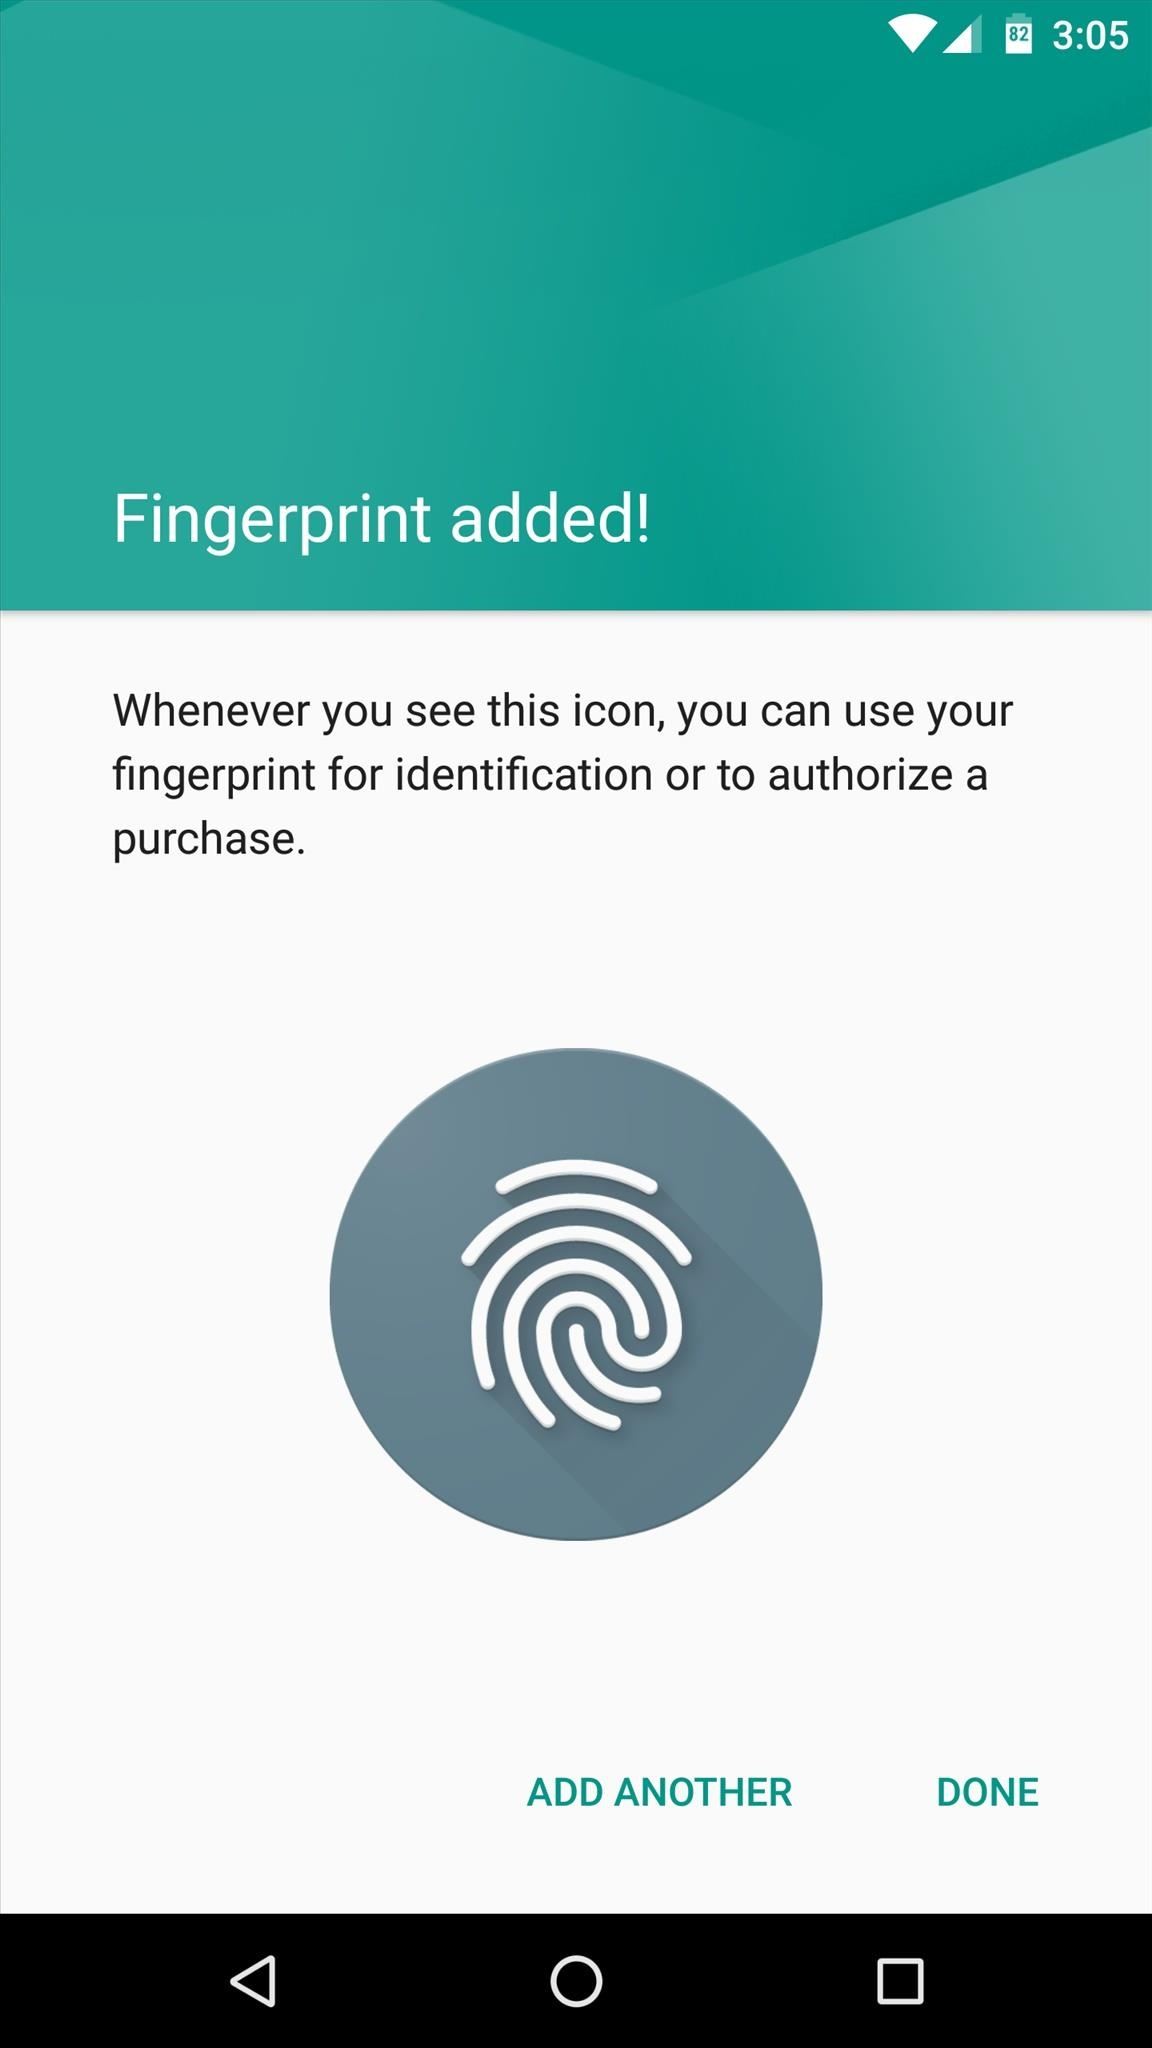 Android Basics: How to Unlock Your Phone with Your Fingerprint